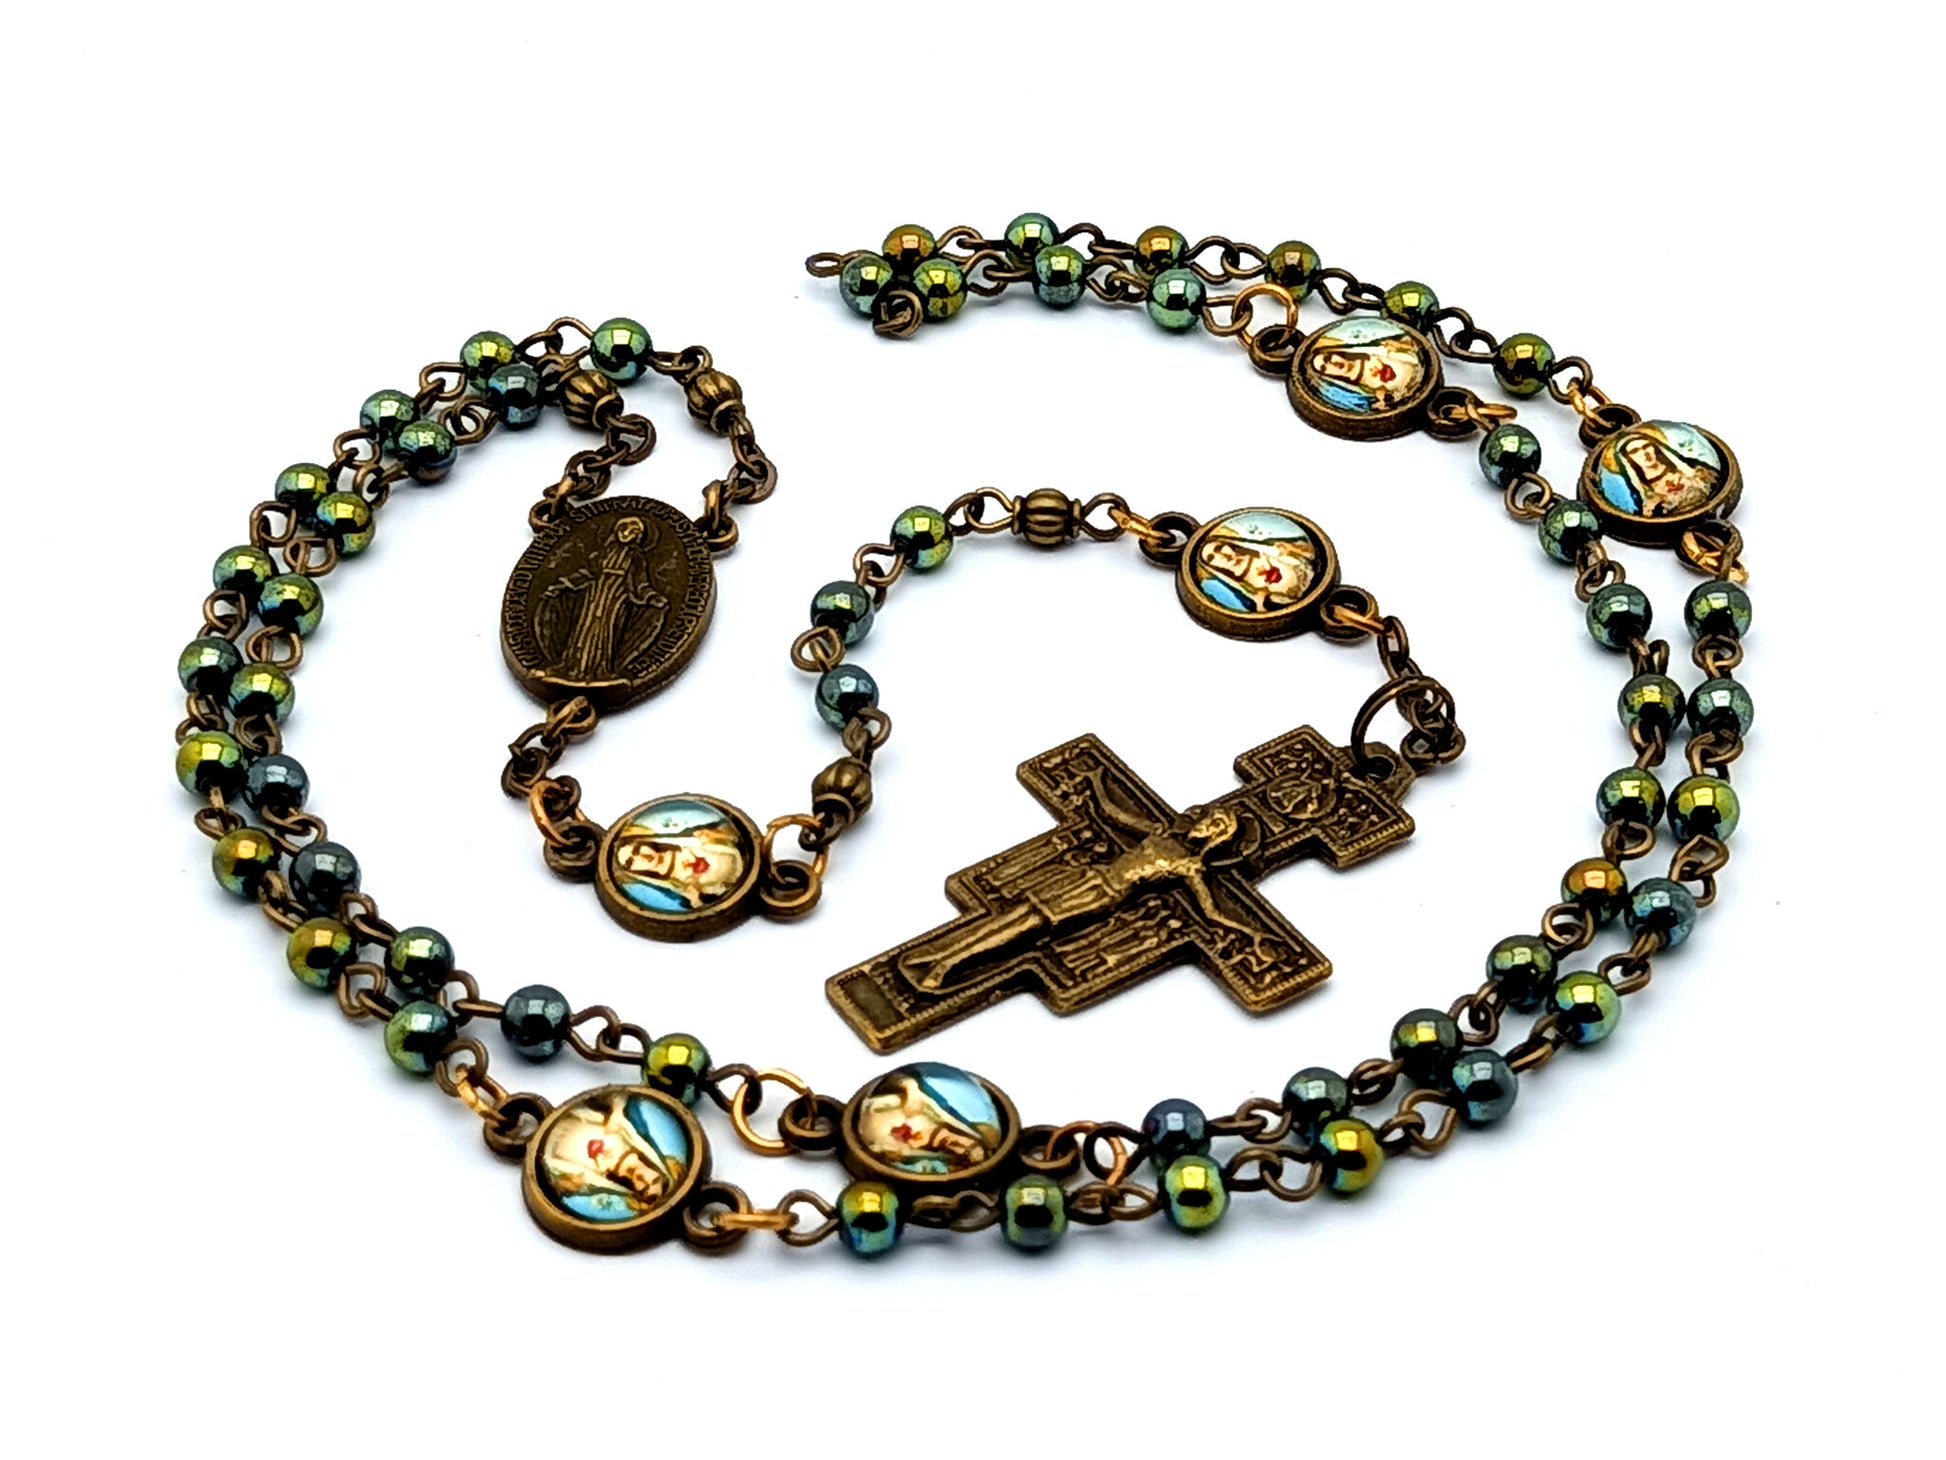 Vintage style miniature Miraculous medal unique rosary beads with hematite gemstone beads and Immaculate Heart medals and Saint Francis of Assisi crucifix.